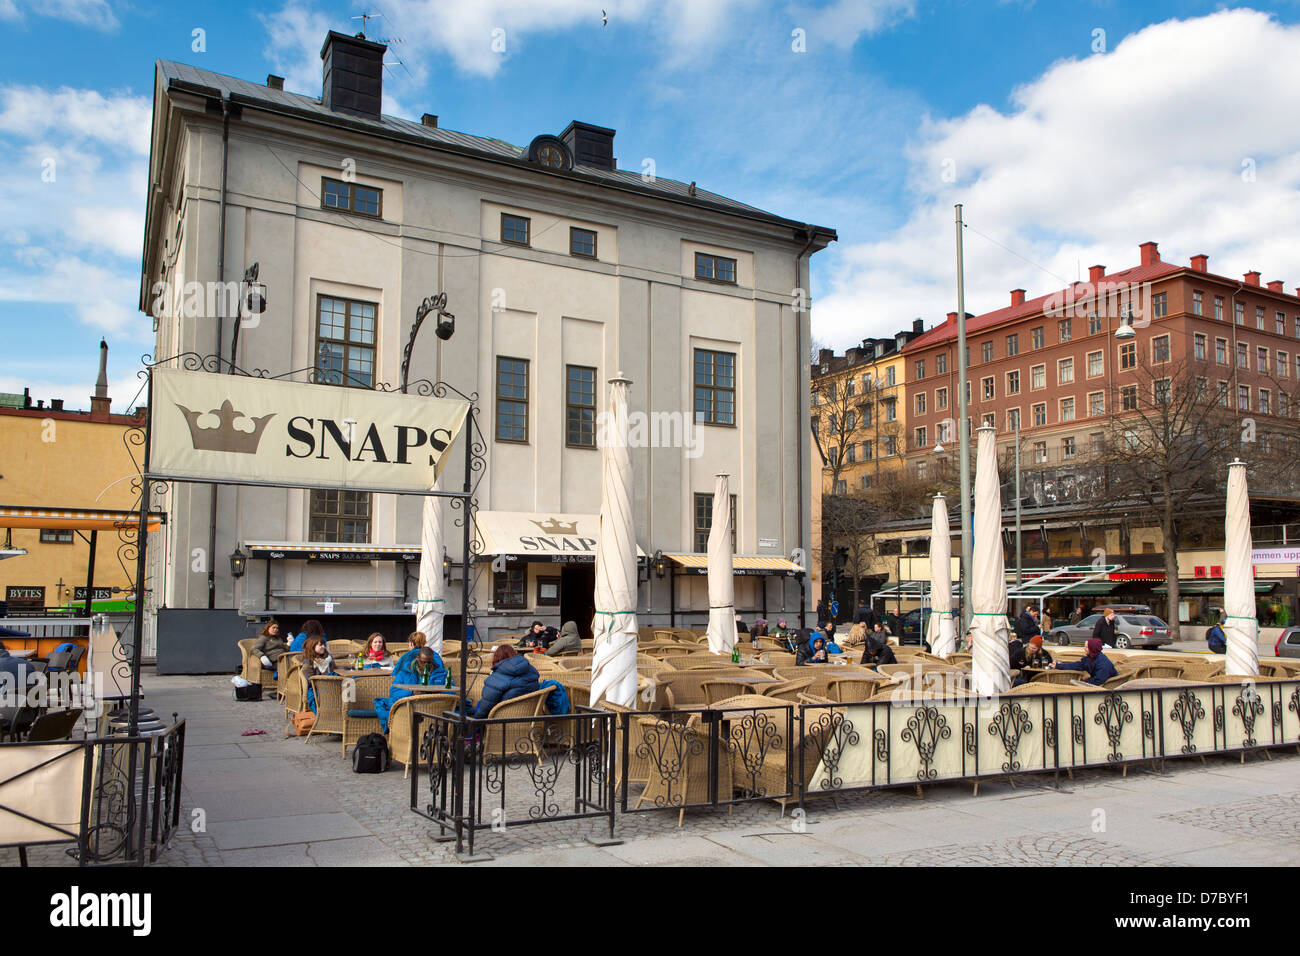 Snaps, Bar and grill in Stockholm, Sweden. Stock Photo